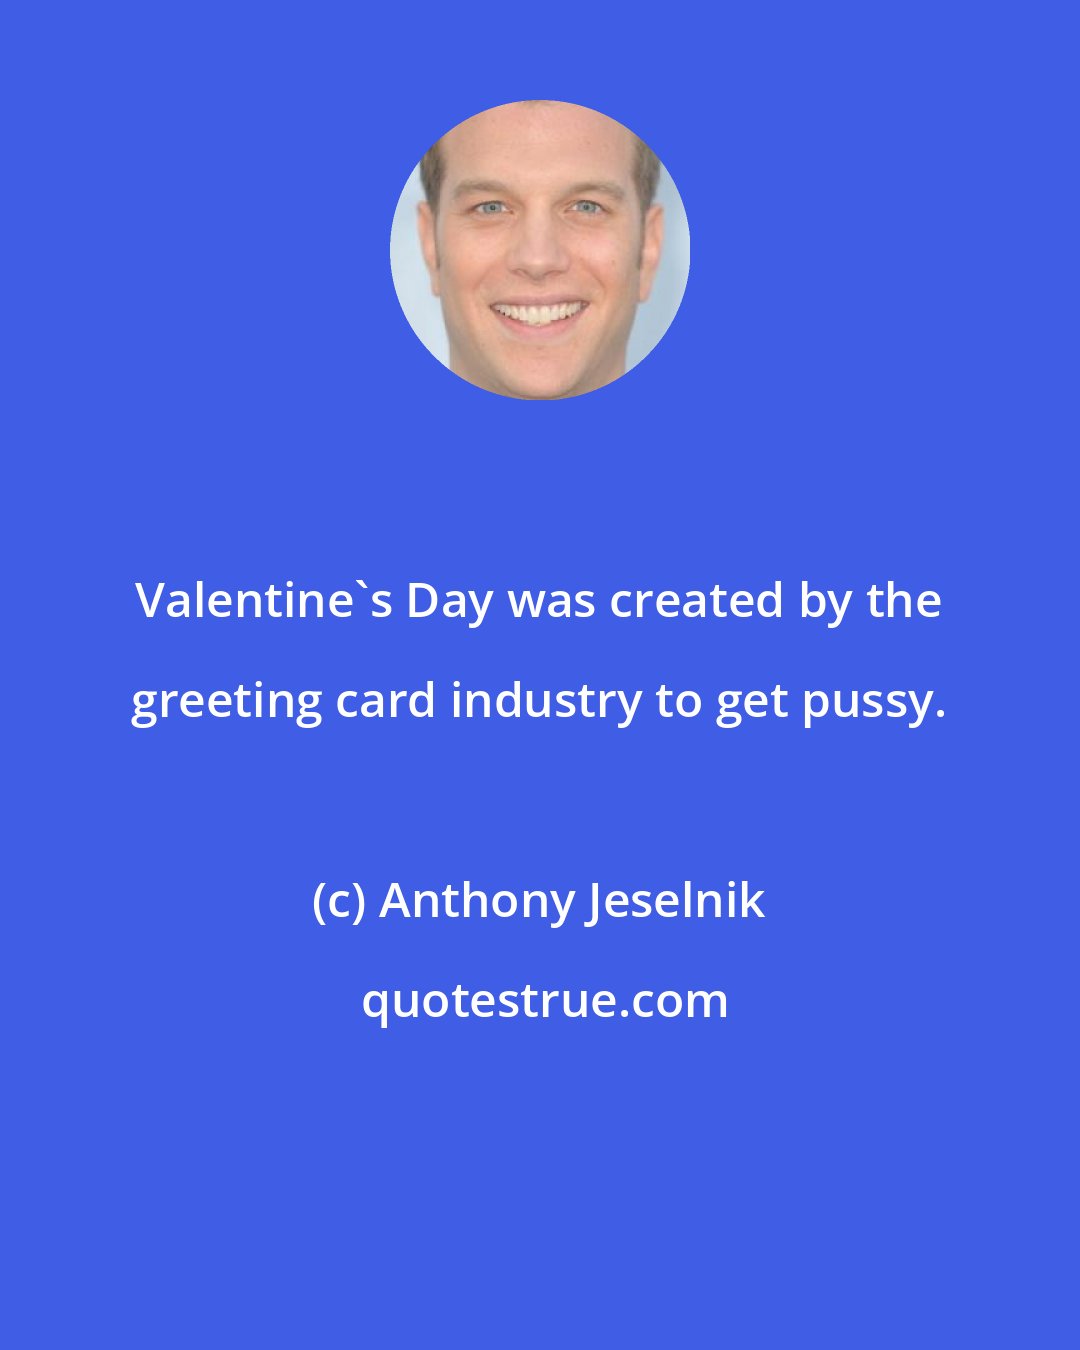 Anthony Jeselnik: Valentine's Day was created by the greeting card industry to get pussy.